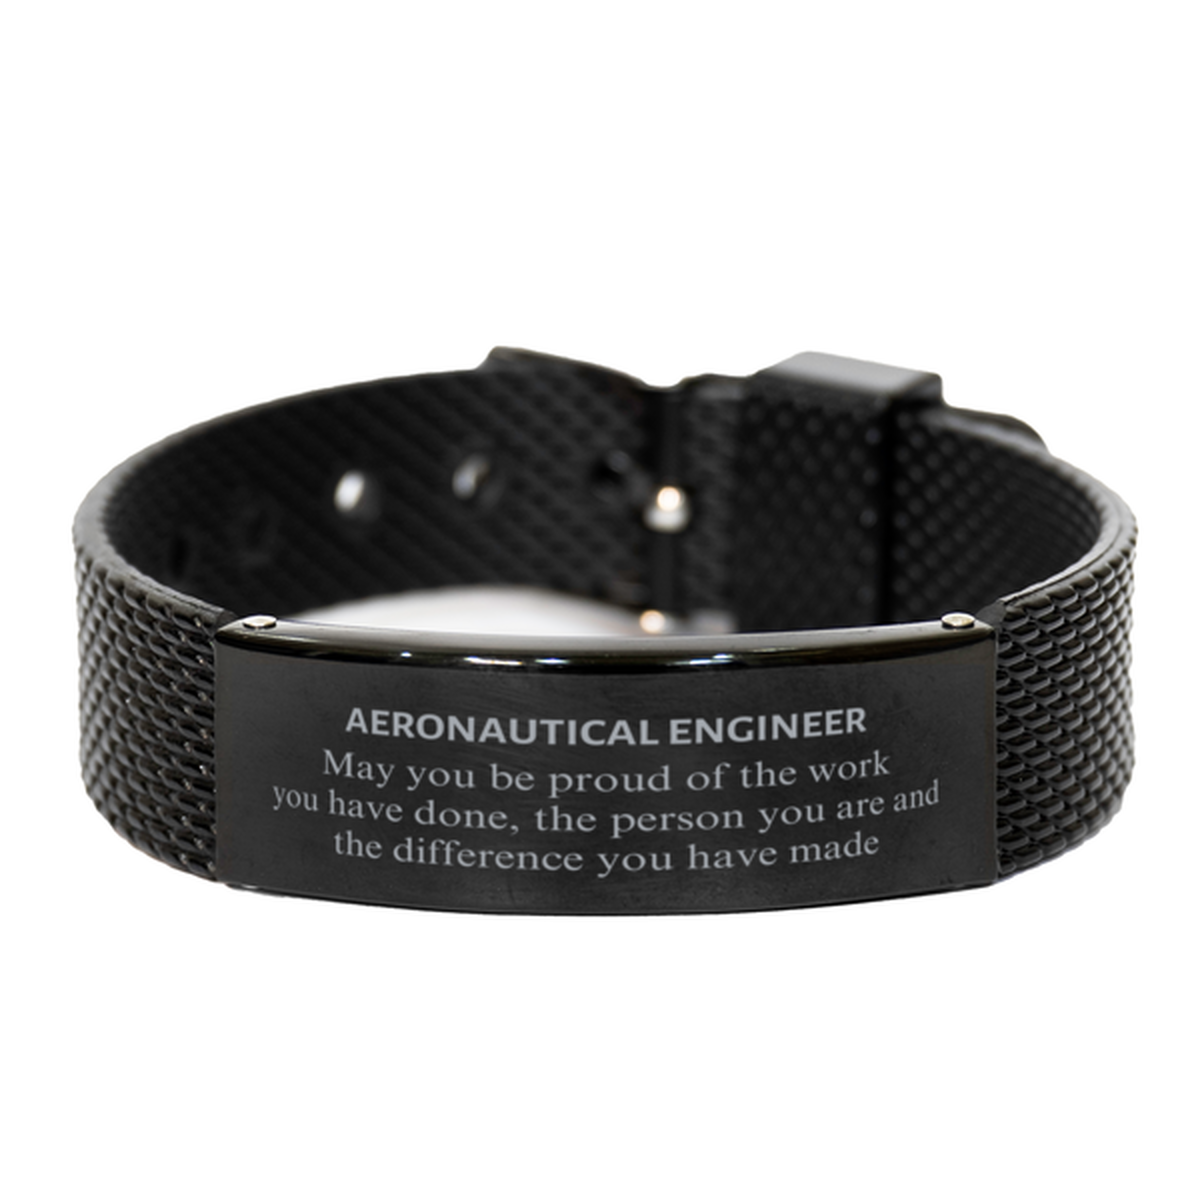 Aeronautical Engineer May you be proud of the work you have done, Retirement Aeronautical Engineer Black Shark Mesh Bracelet for Colleague Appreciation Gifts Amazing for Aeronautical Engineer